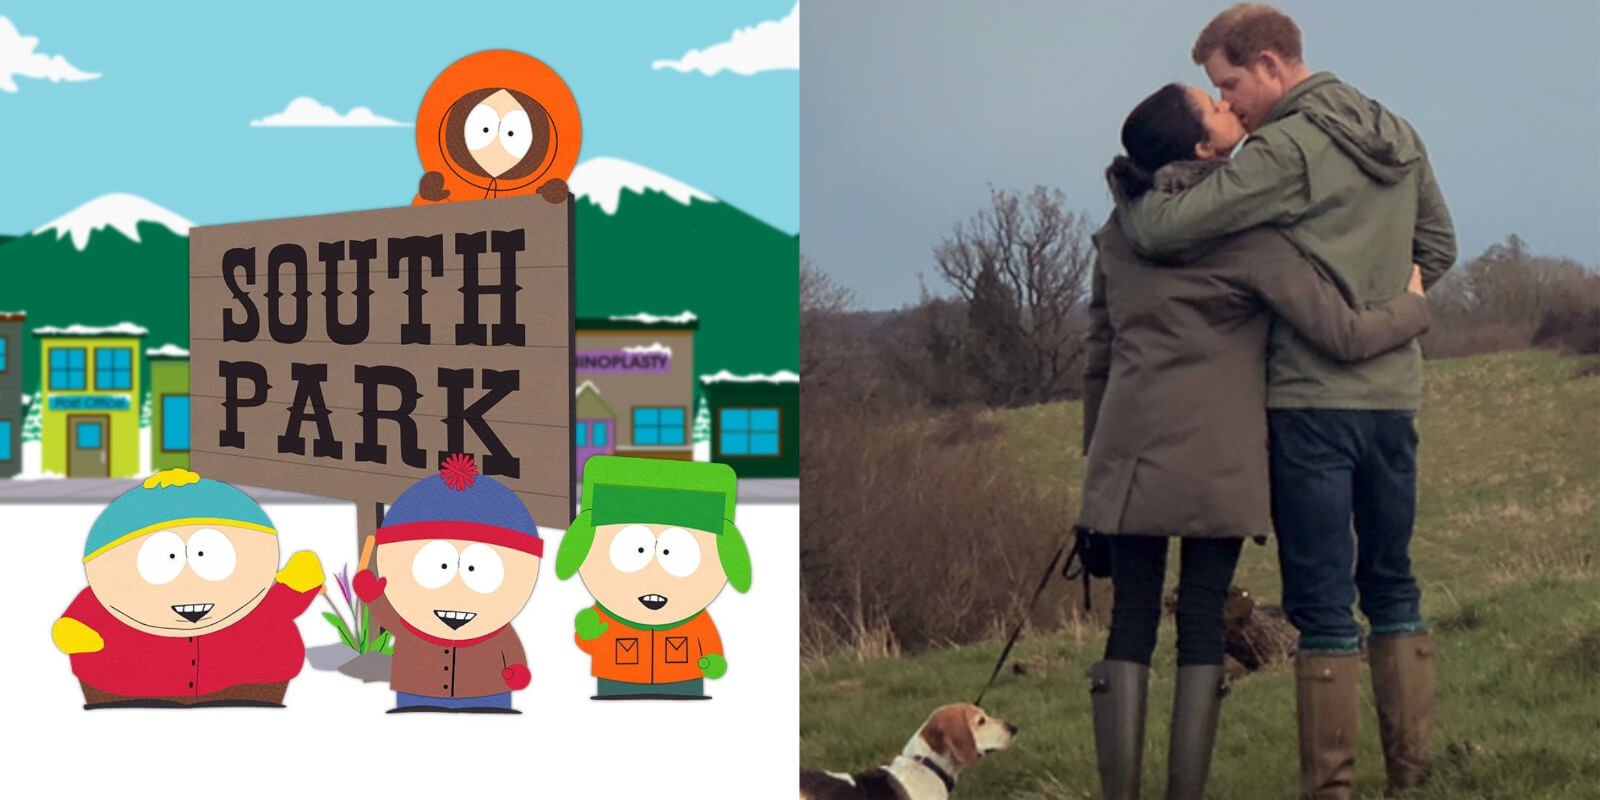 'South Park' characters and a photo of Prince Harry and Meghan Markle from their Netflix docuseries 'Harry & Meghan.'